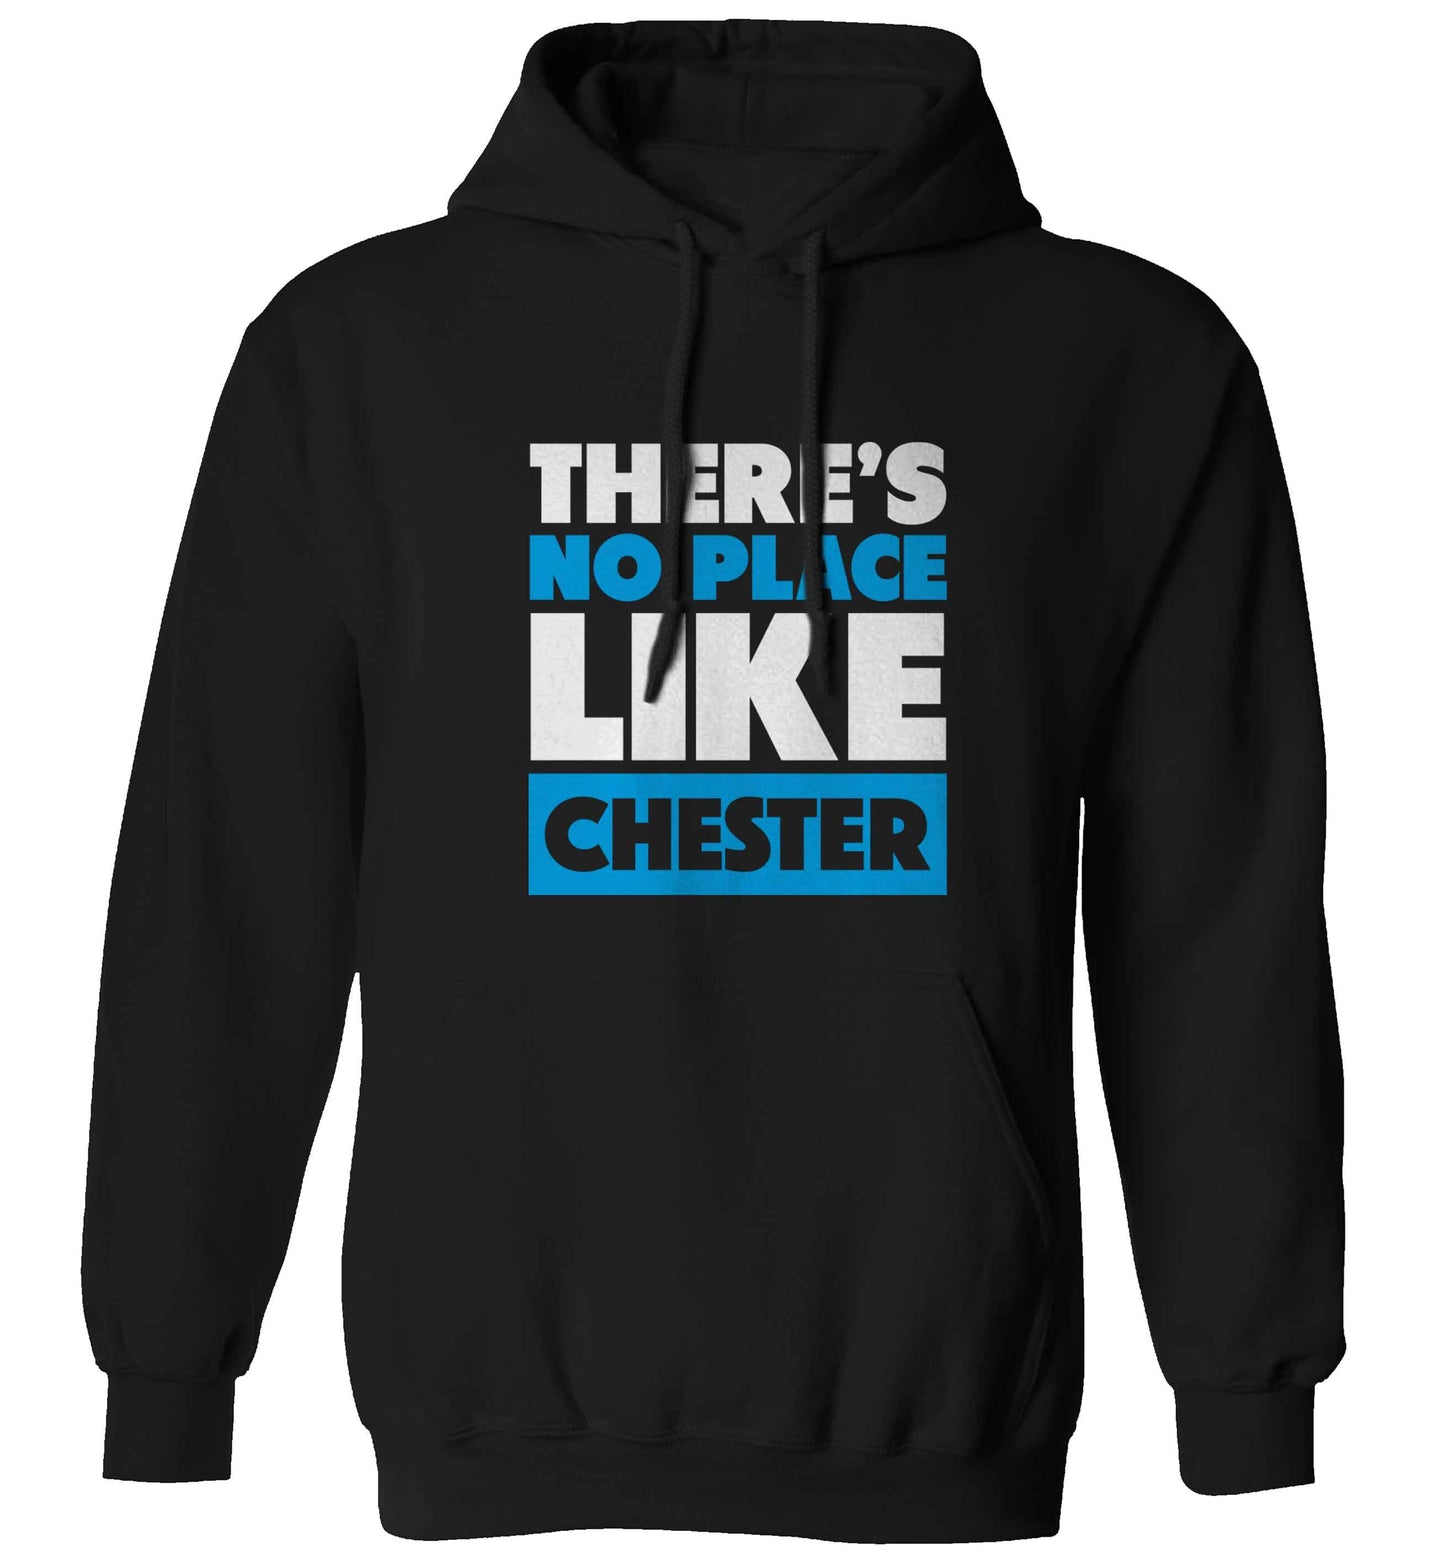 There's no place like Chester adults unisex black hoodie 2XL